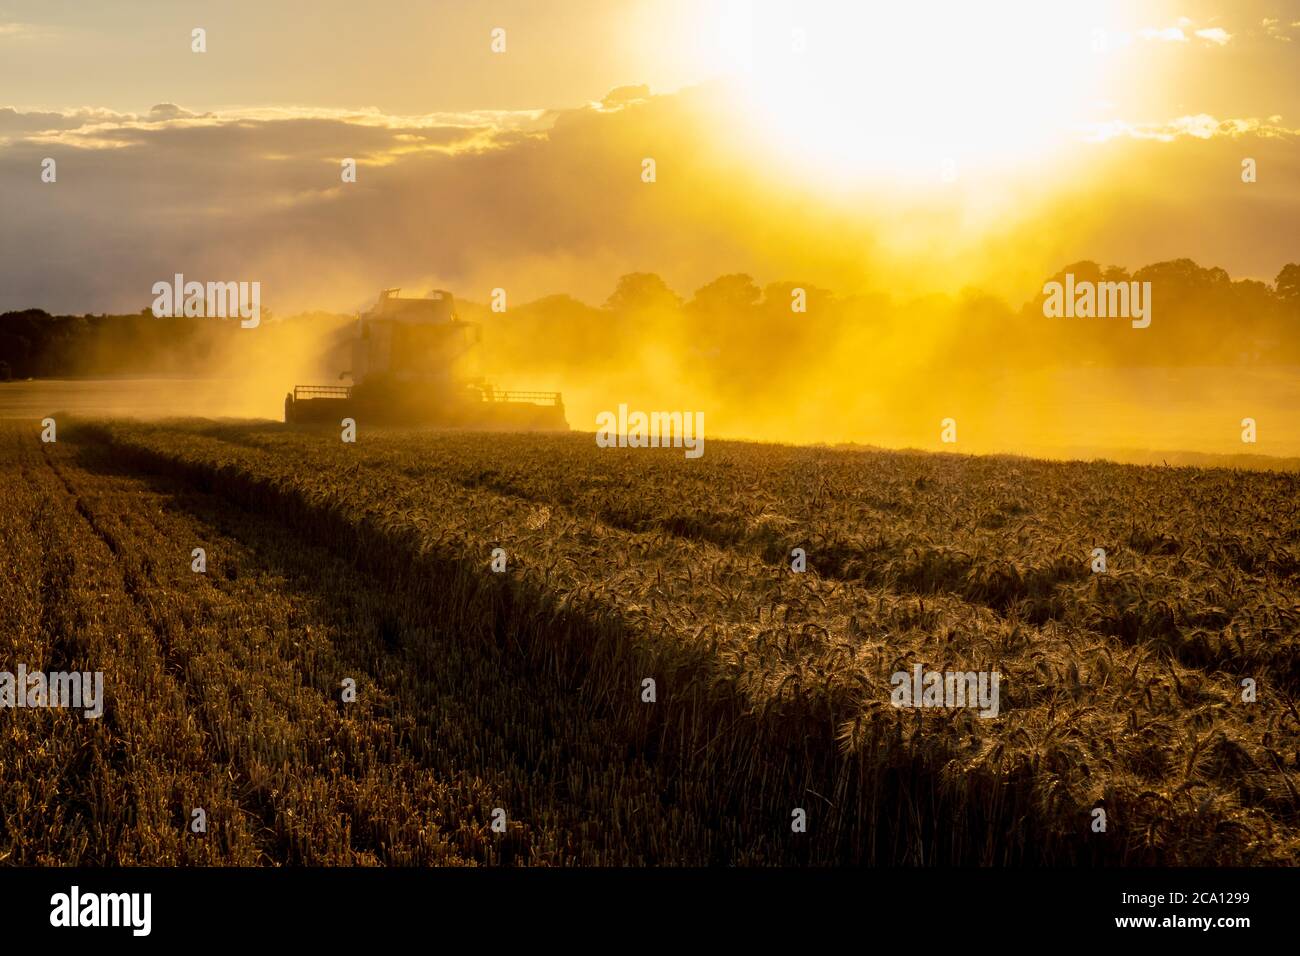 Spectacular harvest with a combine Stock Photo